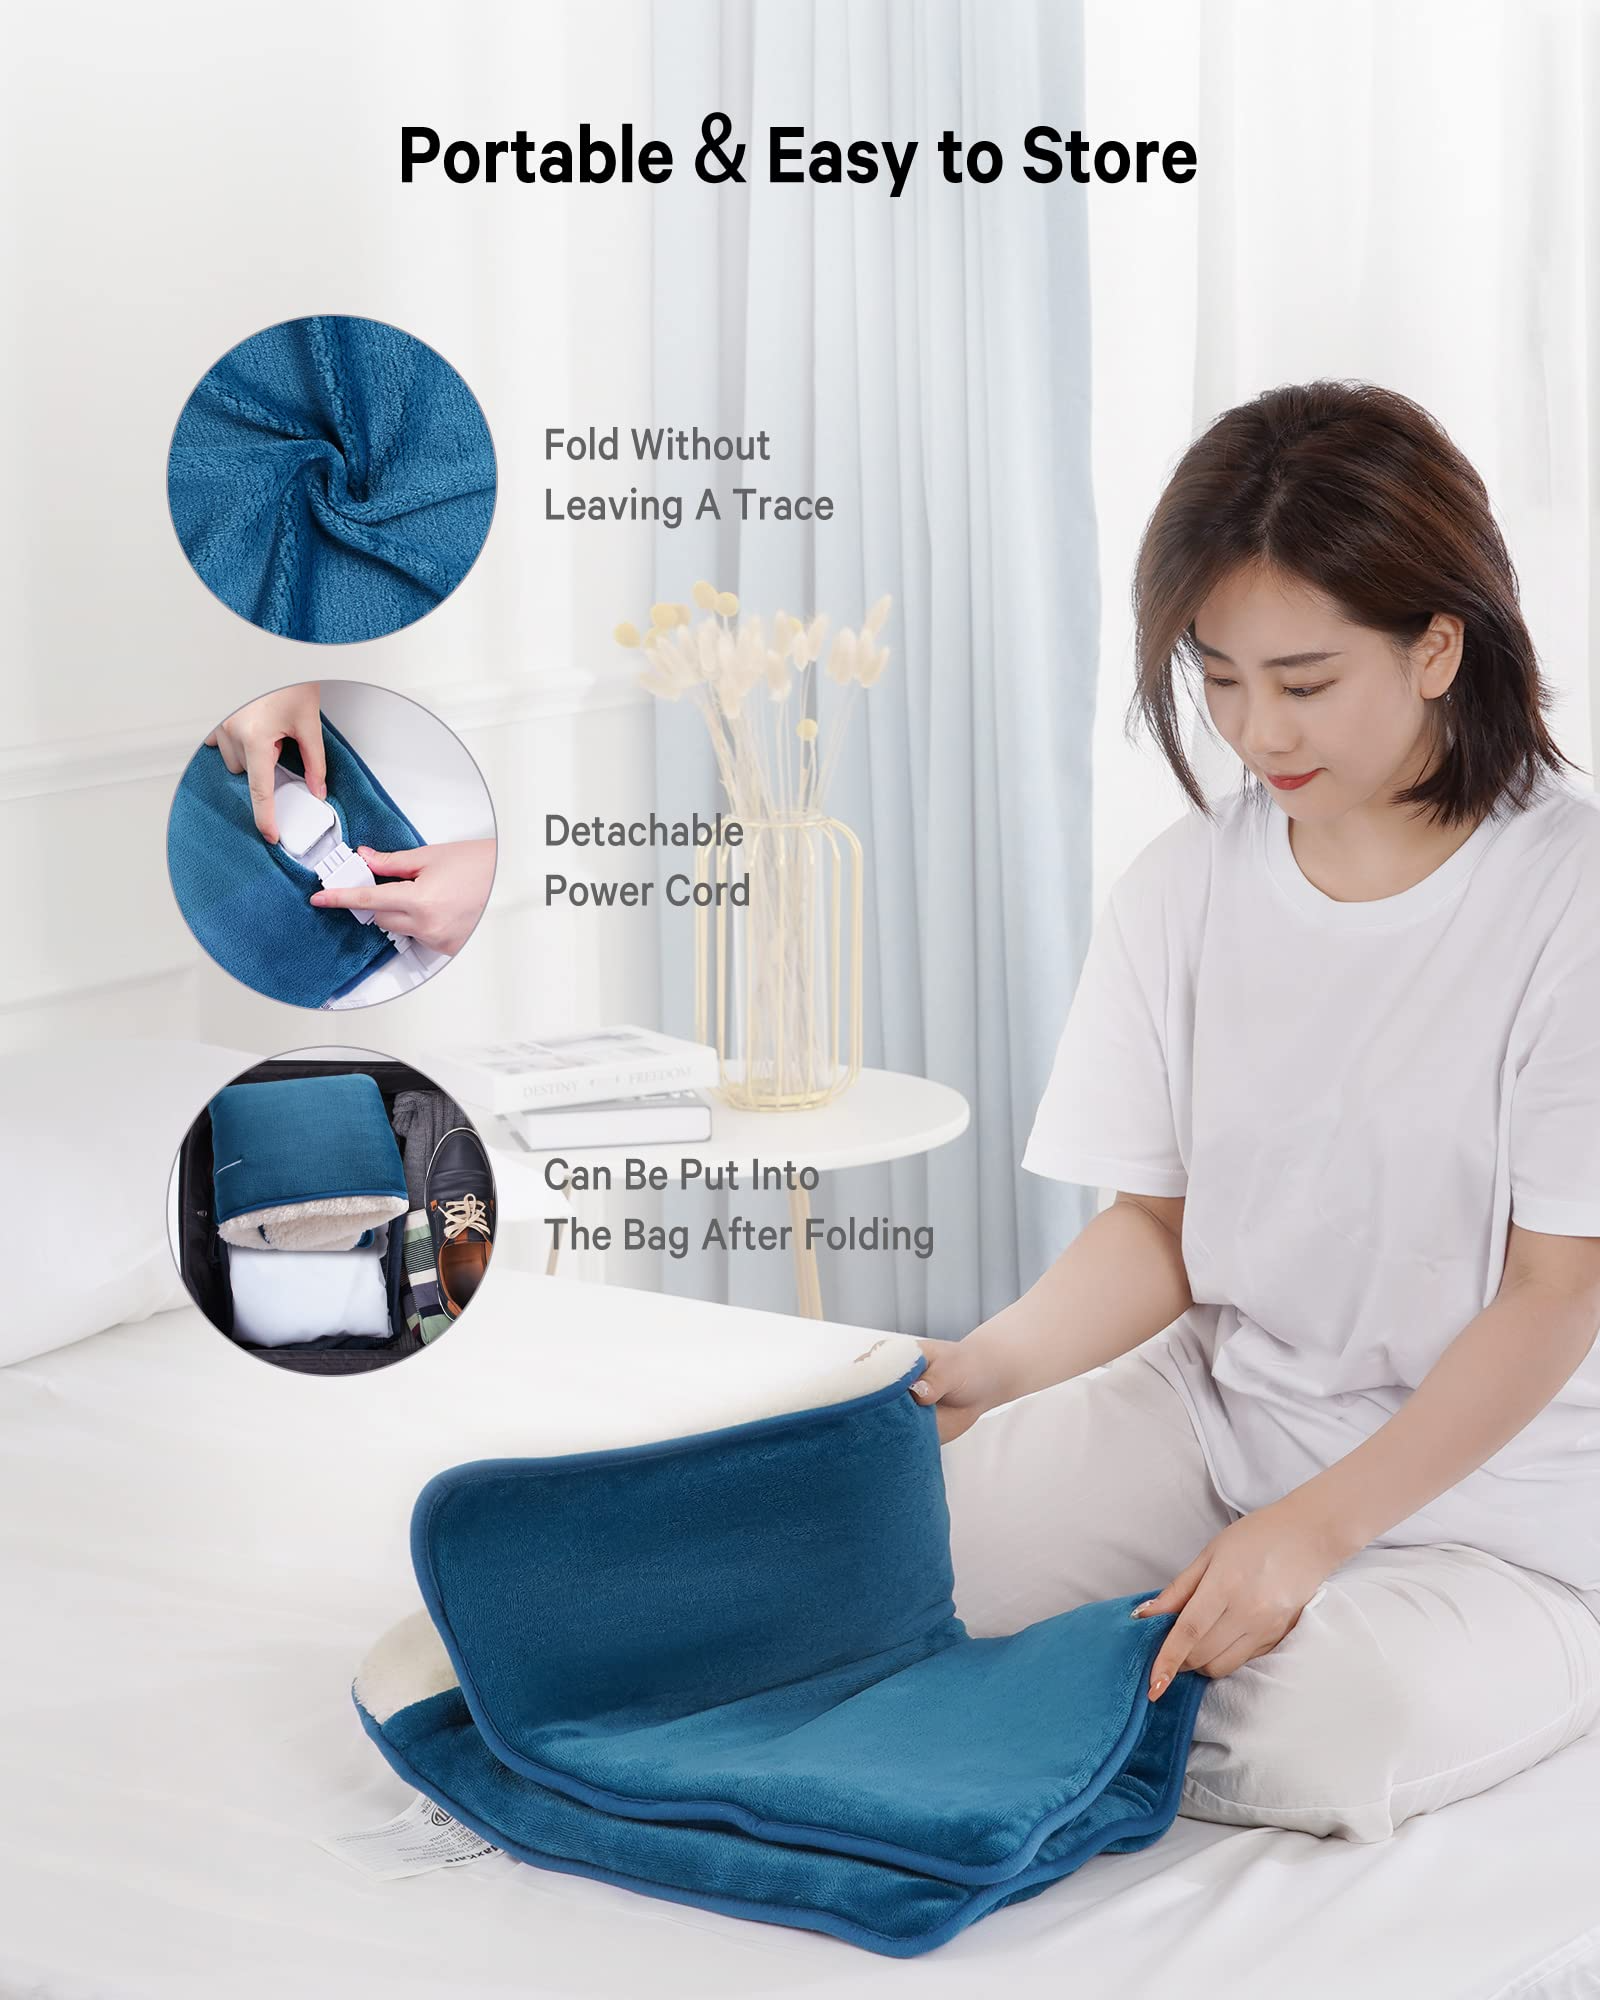 Load image into Gallery viewer, Maxkare Heating Pad Electric Foot Warmer - 20in x 32in Extra Large Size Full-Body Use for Feet, Back, Shoulders with Auto Shut Off, Blue
